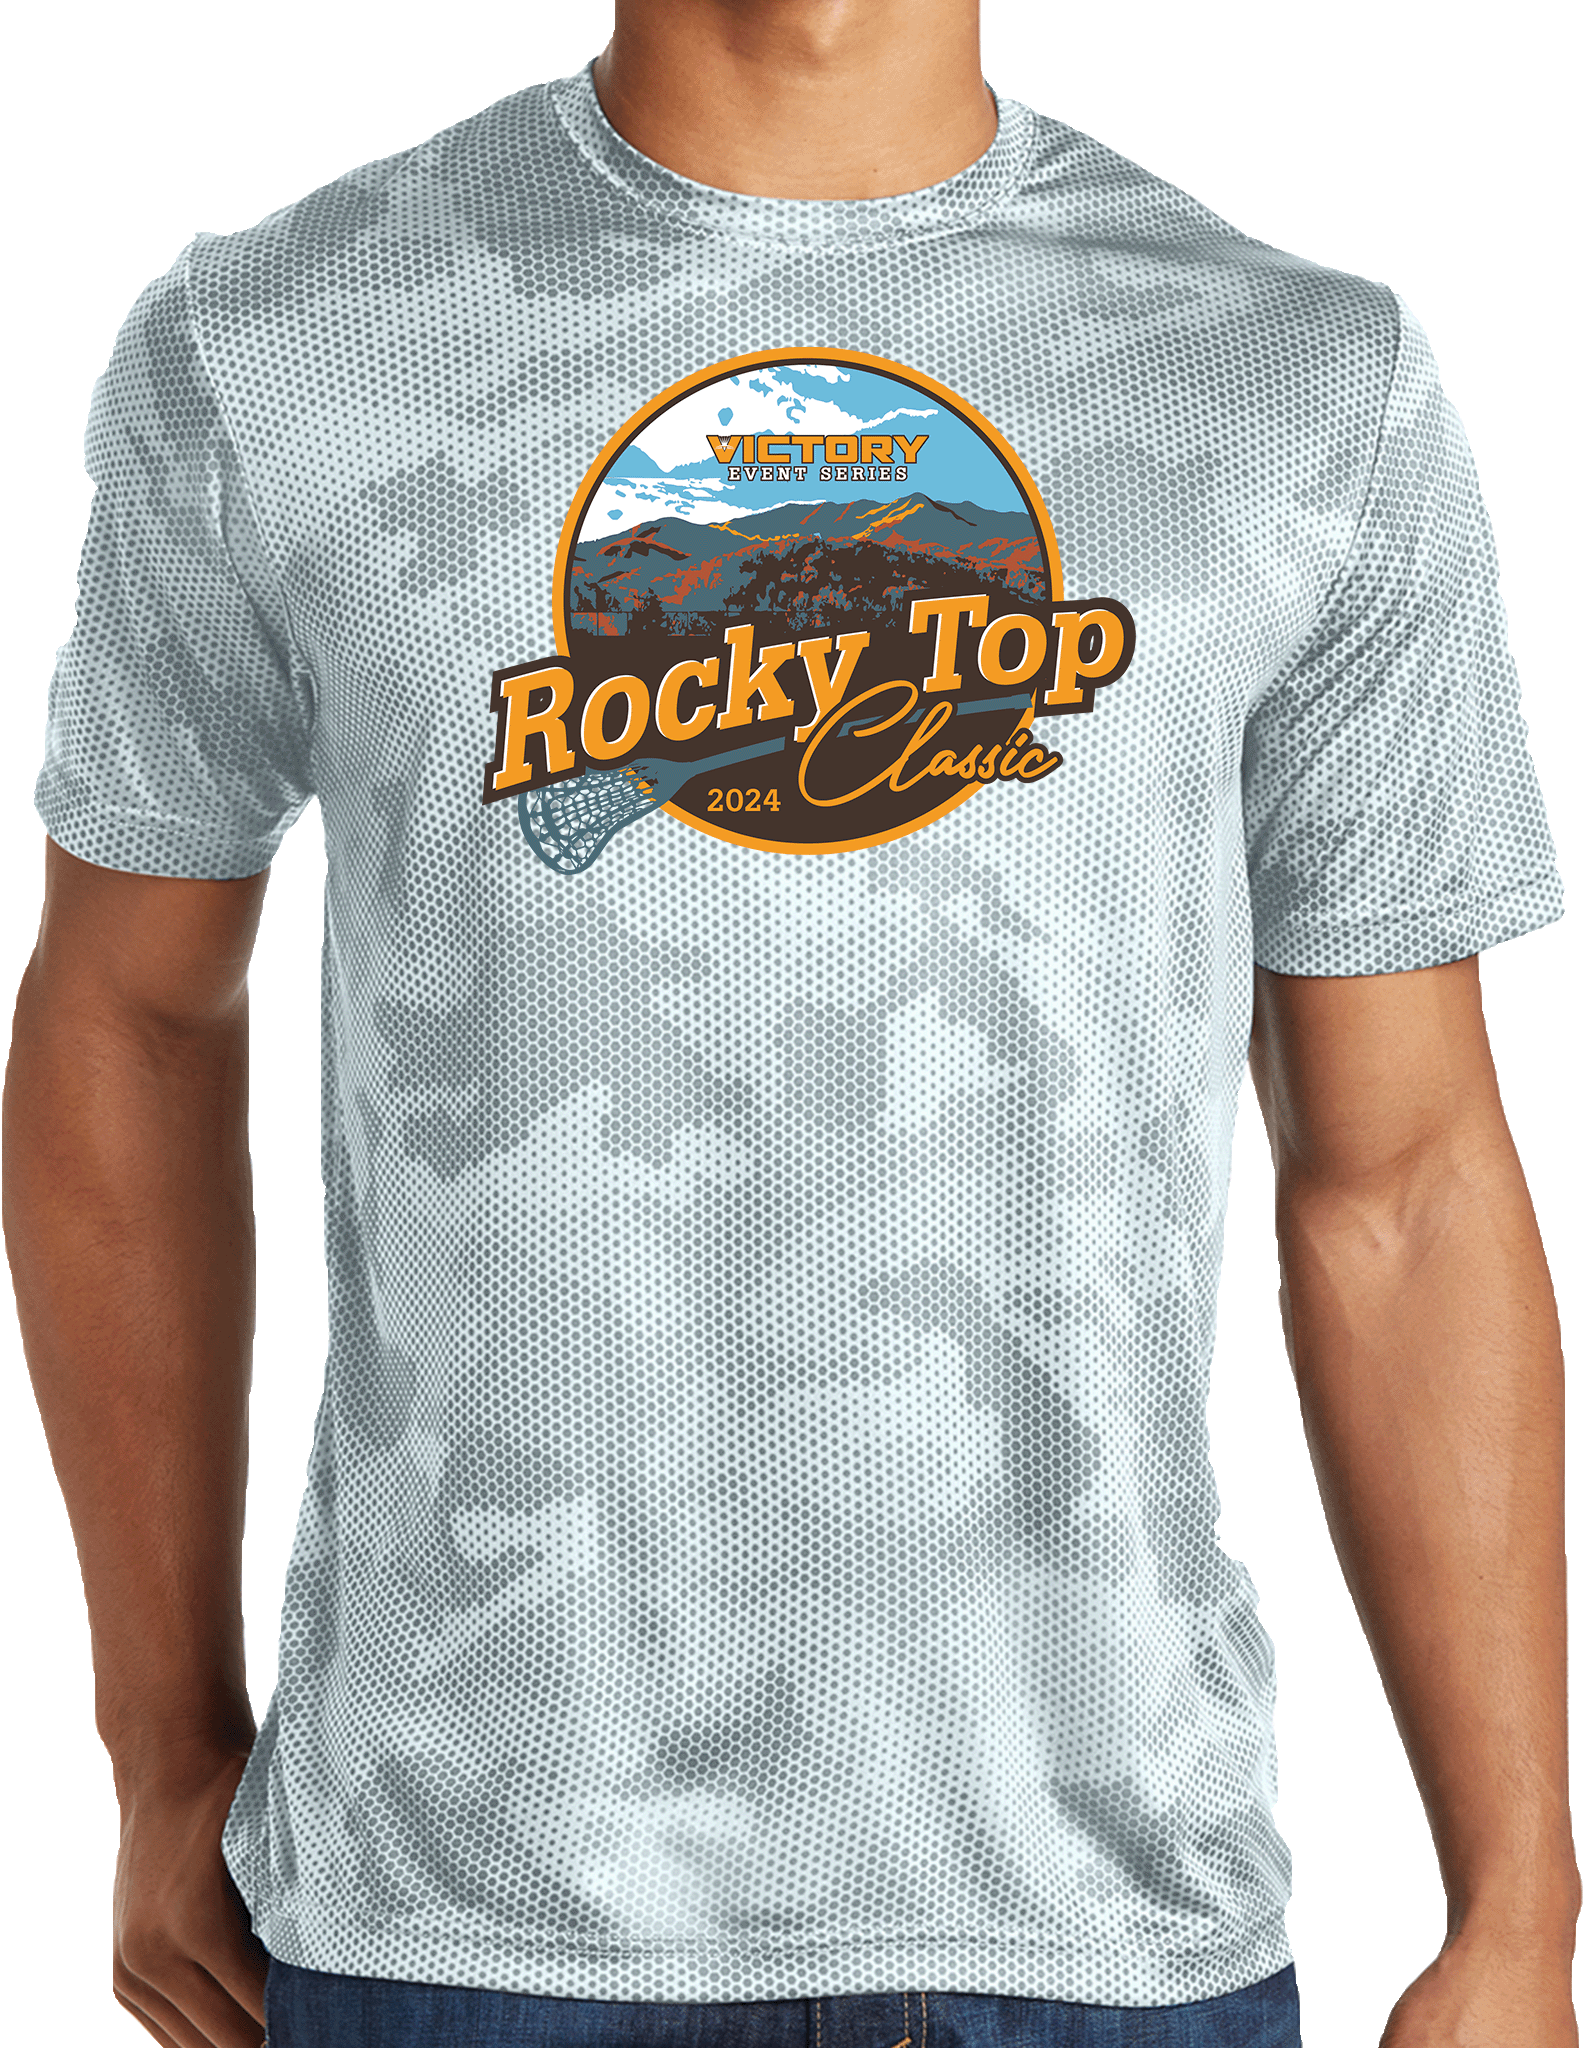 Performance Shirts - 2024 Rocky Top Classic